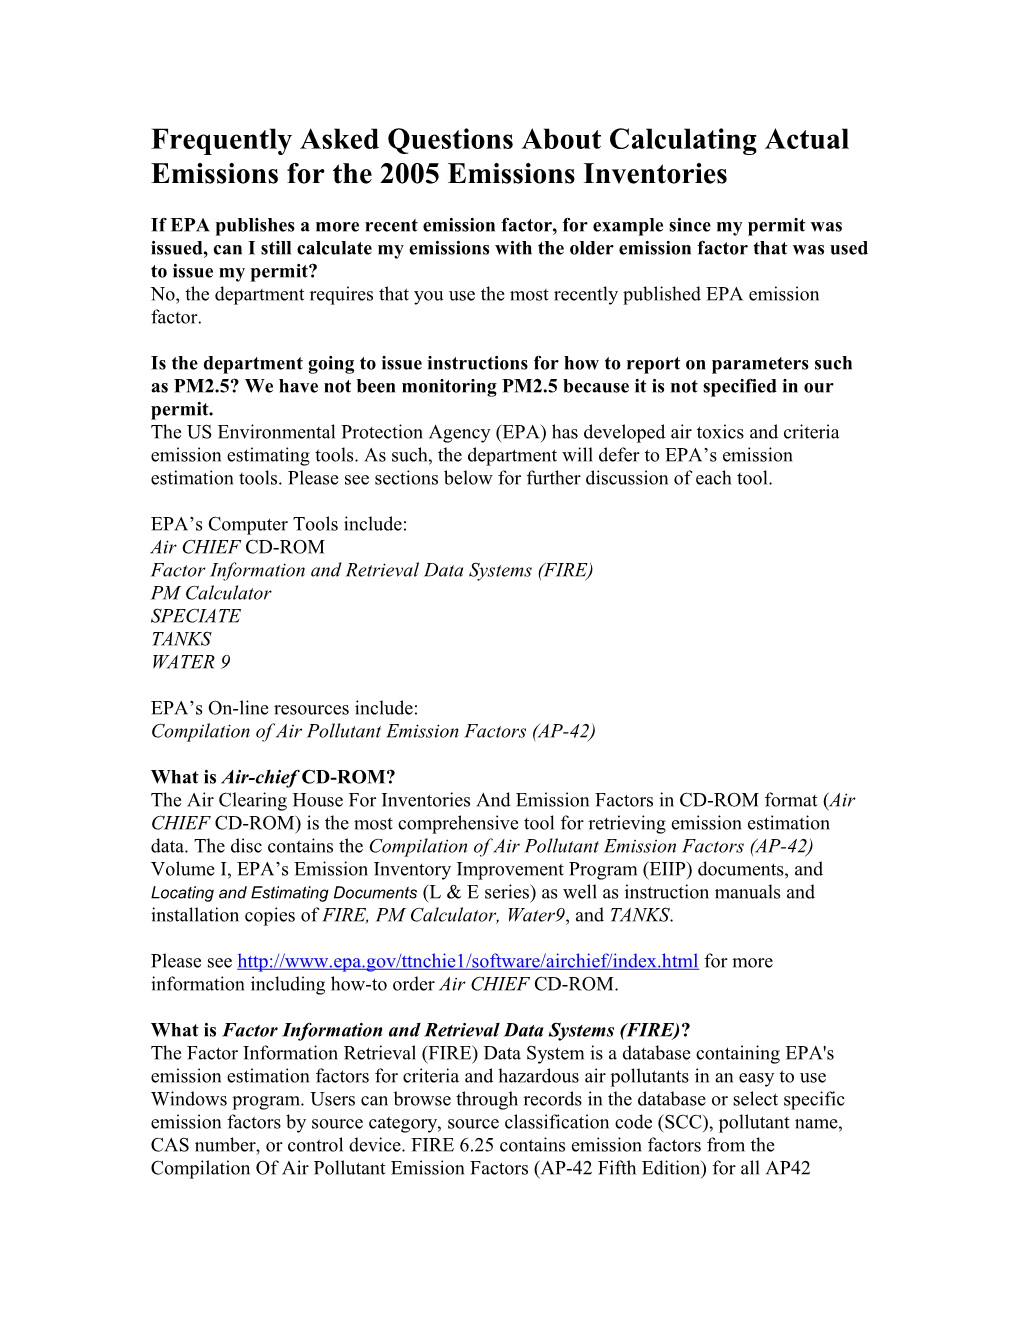 Frequently Asked Questions About Calculating Actual Emissions for the 2004 Emissions Inventories